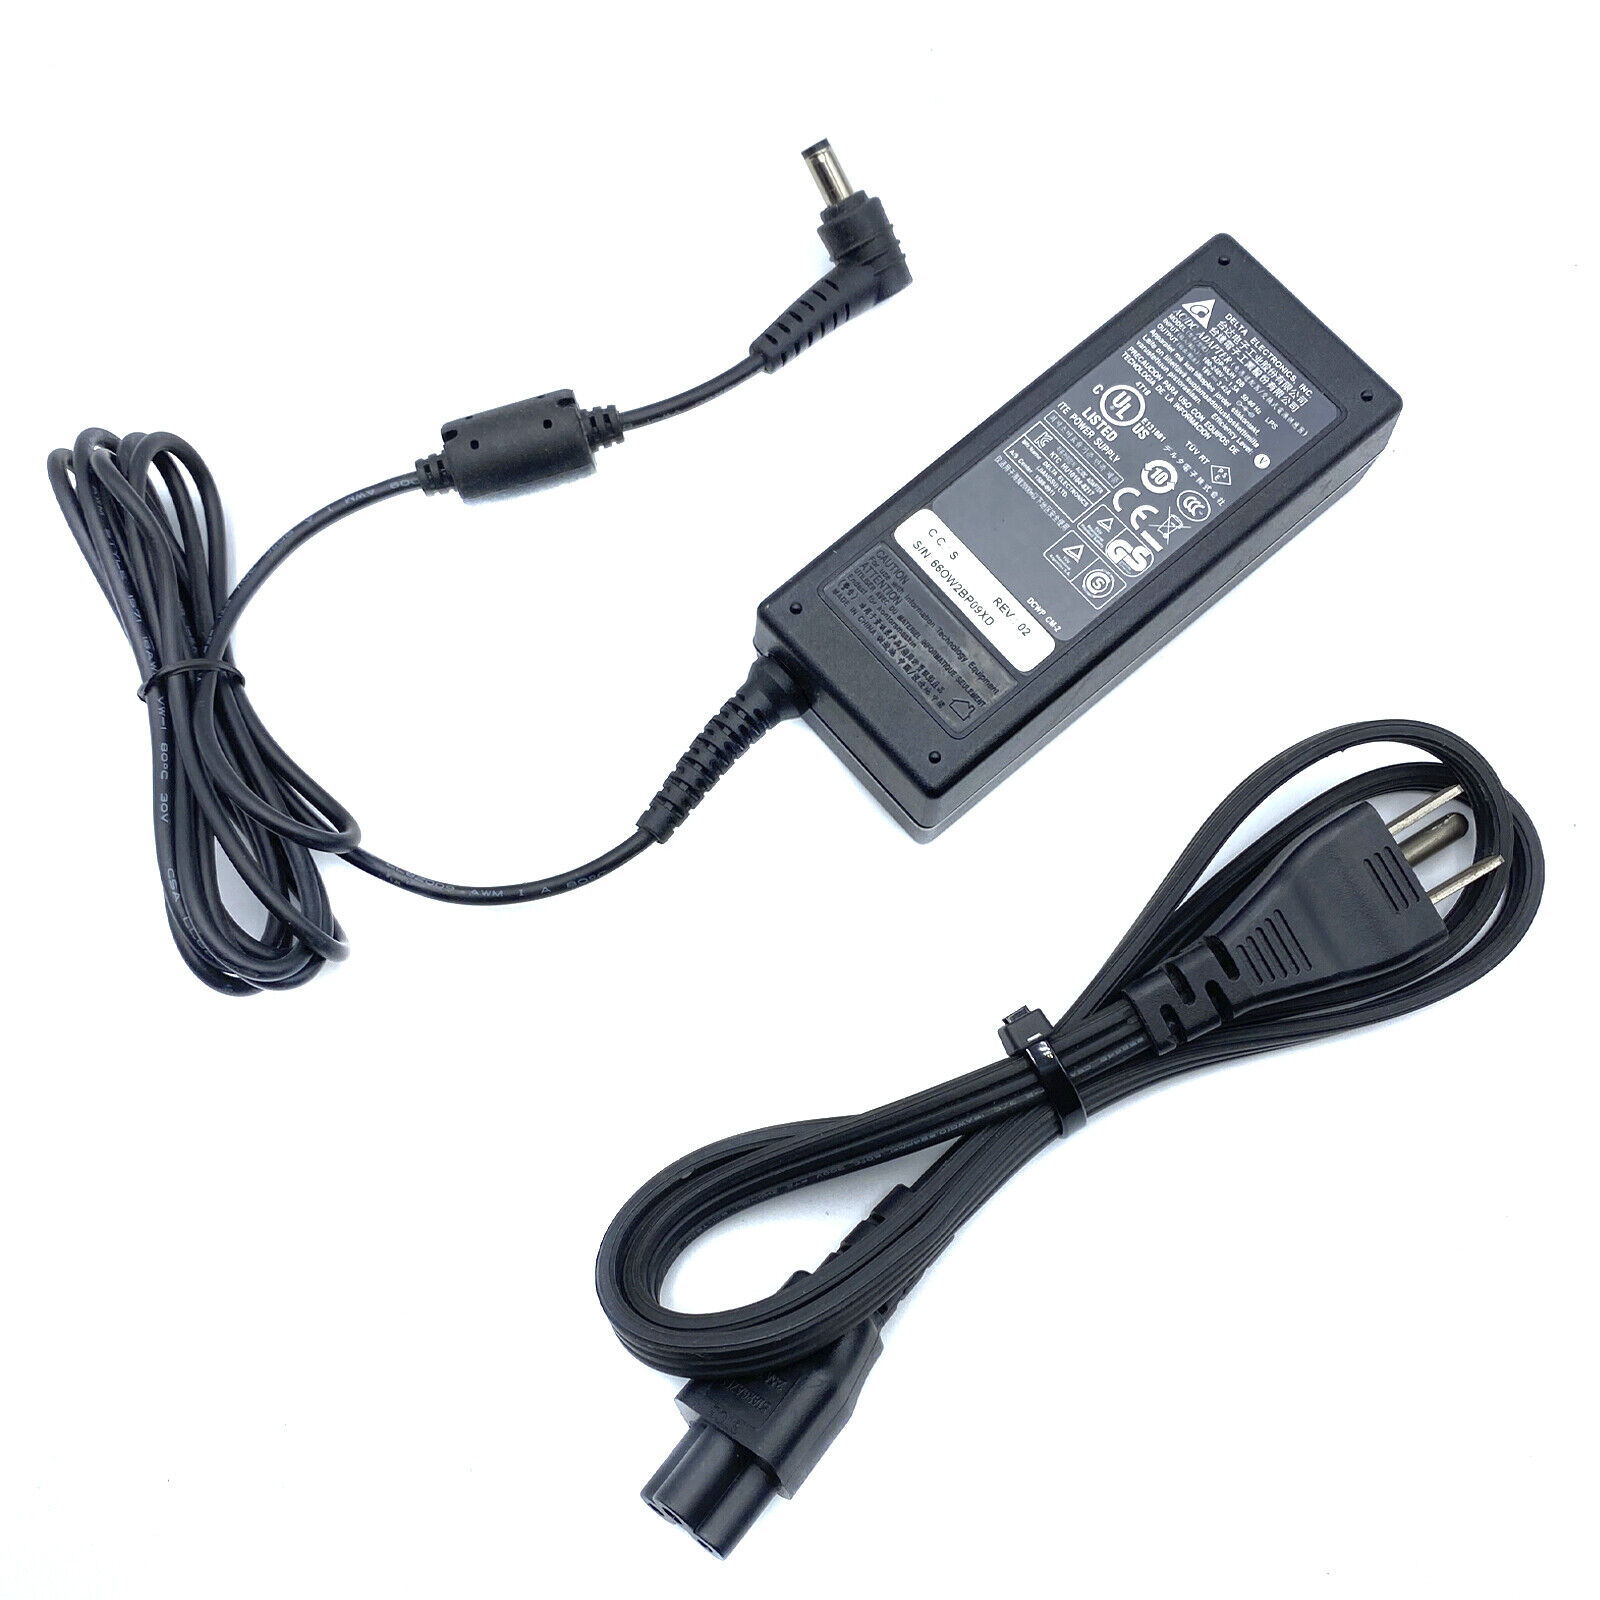 Original Delta AC Adapter Charger for Shuttle OMNINAS KS10 KD20 KD21 KD22 w/Cord